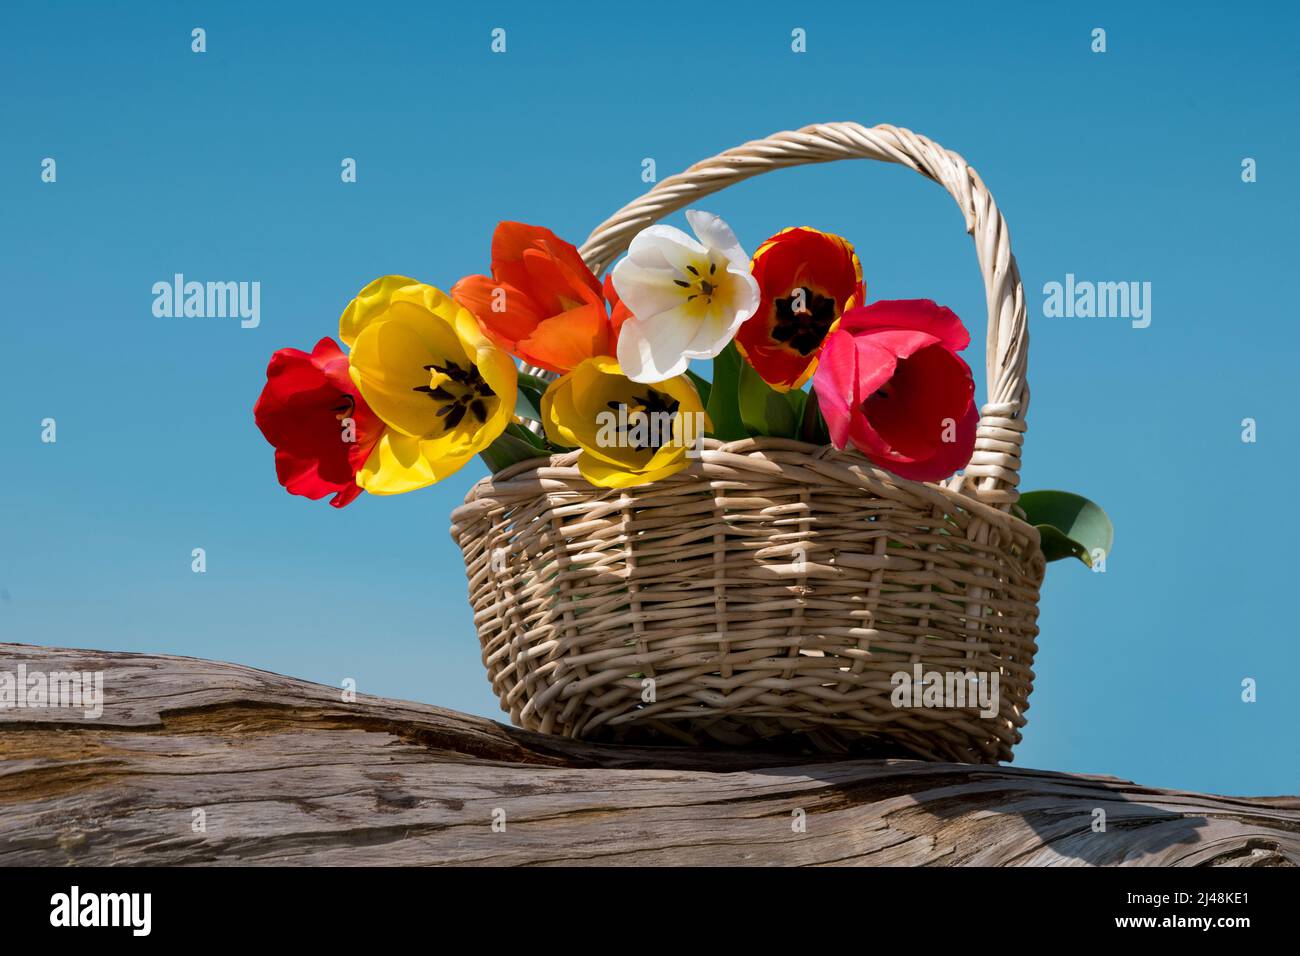 Wicker basket with bunch of colorful tulips with multicolored petals placed on wooden log against blue cloudless sky in countryside Stock Photo